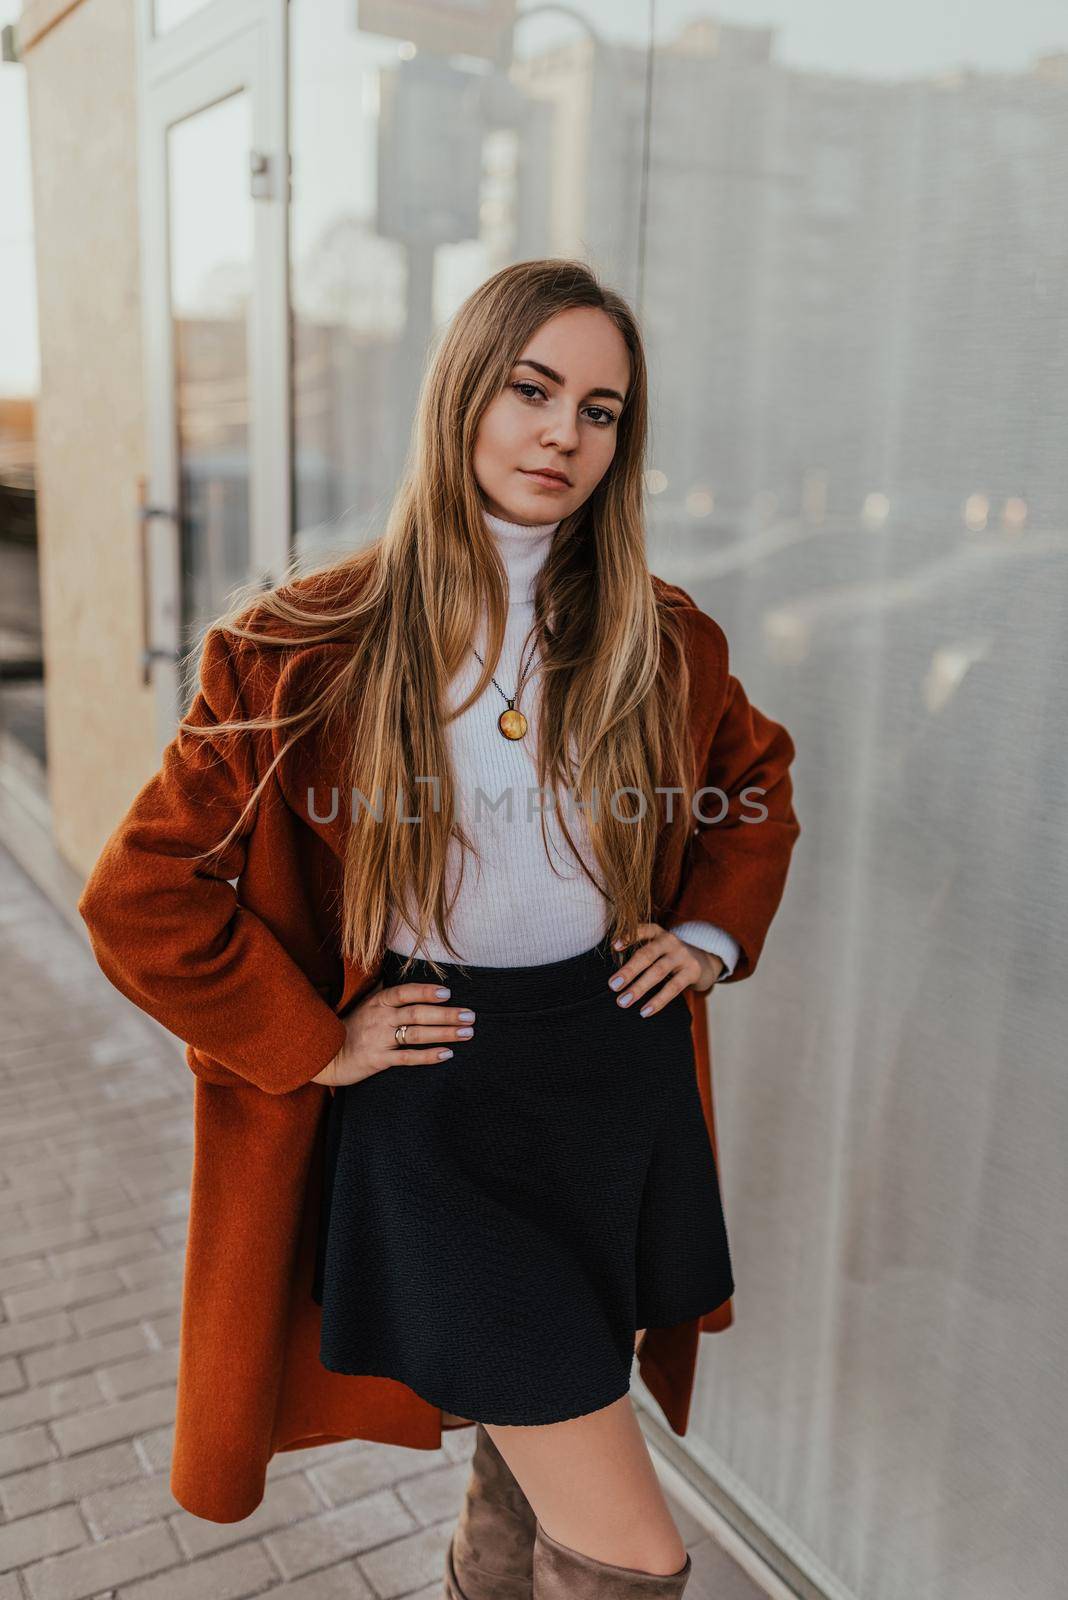 young blonde woman in autumn clothes walks on street background shop windows. Street style Fashion 2021 Winter Spring Terracotta Coat Woolen Cashmere Suede Over Knee Boots White Golf